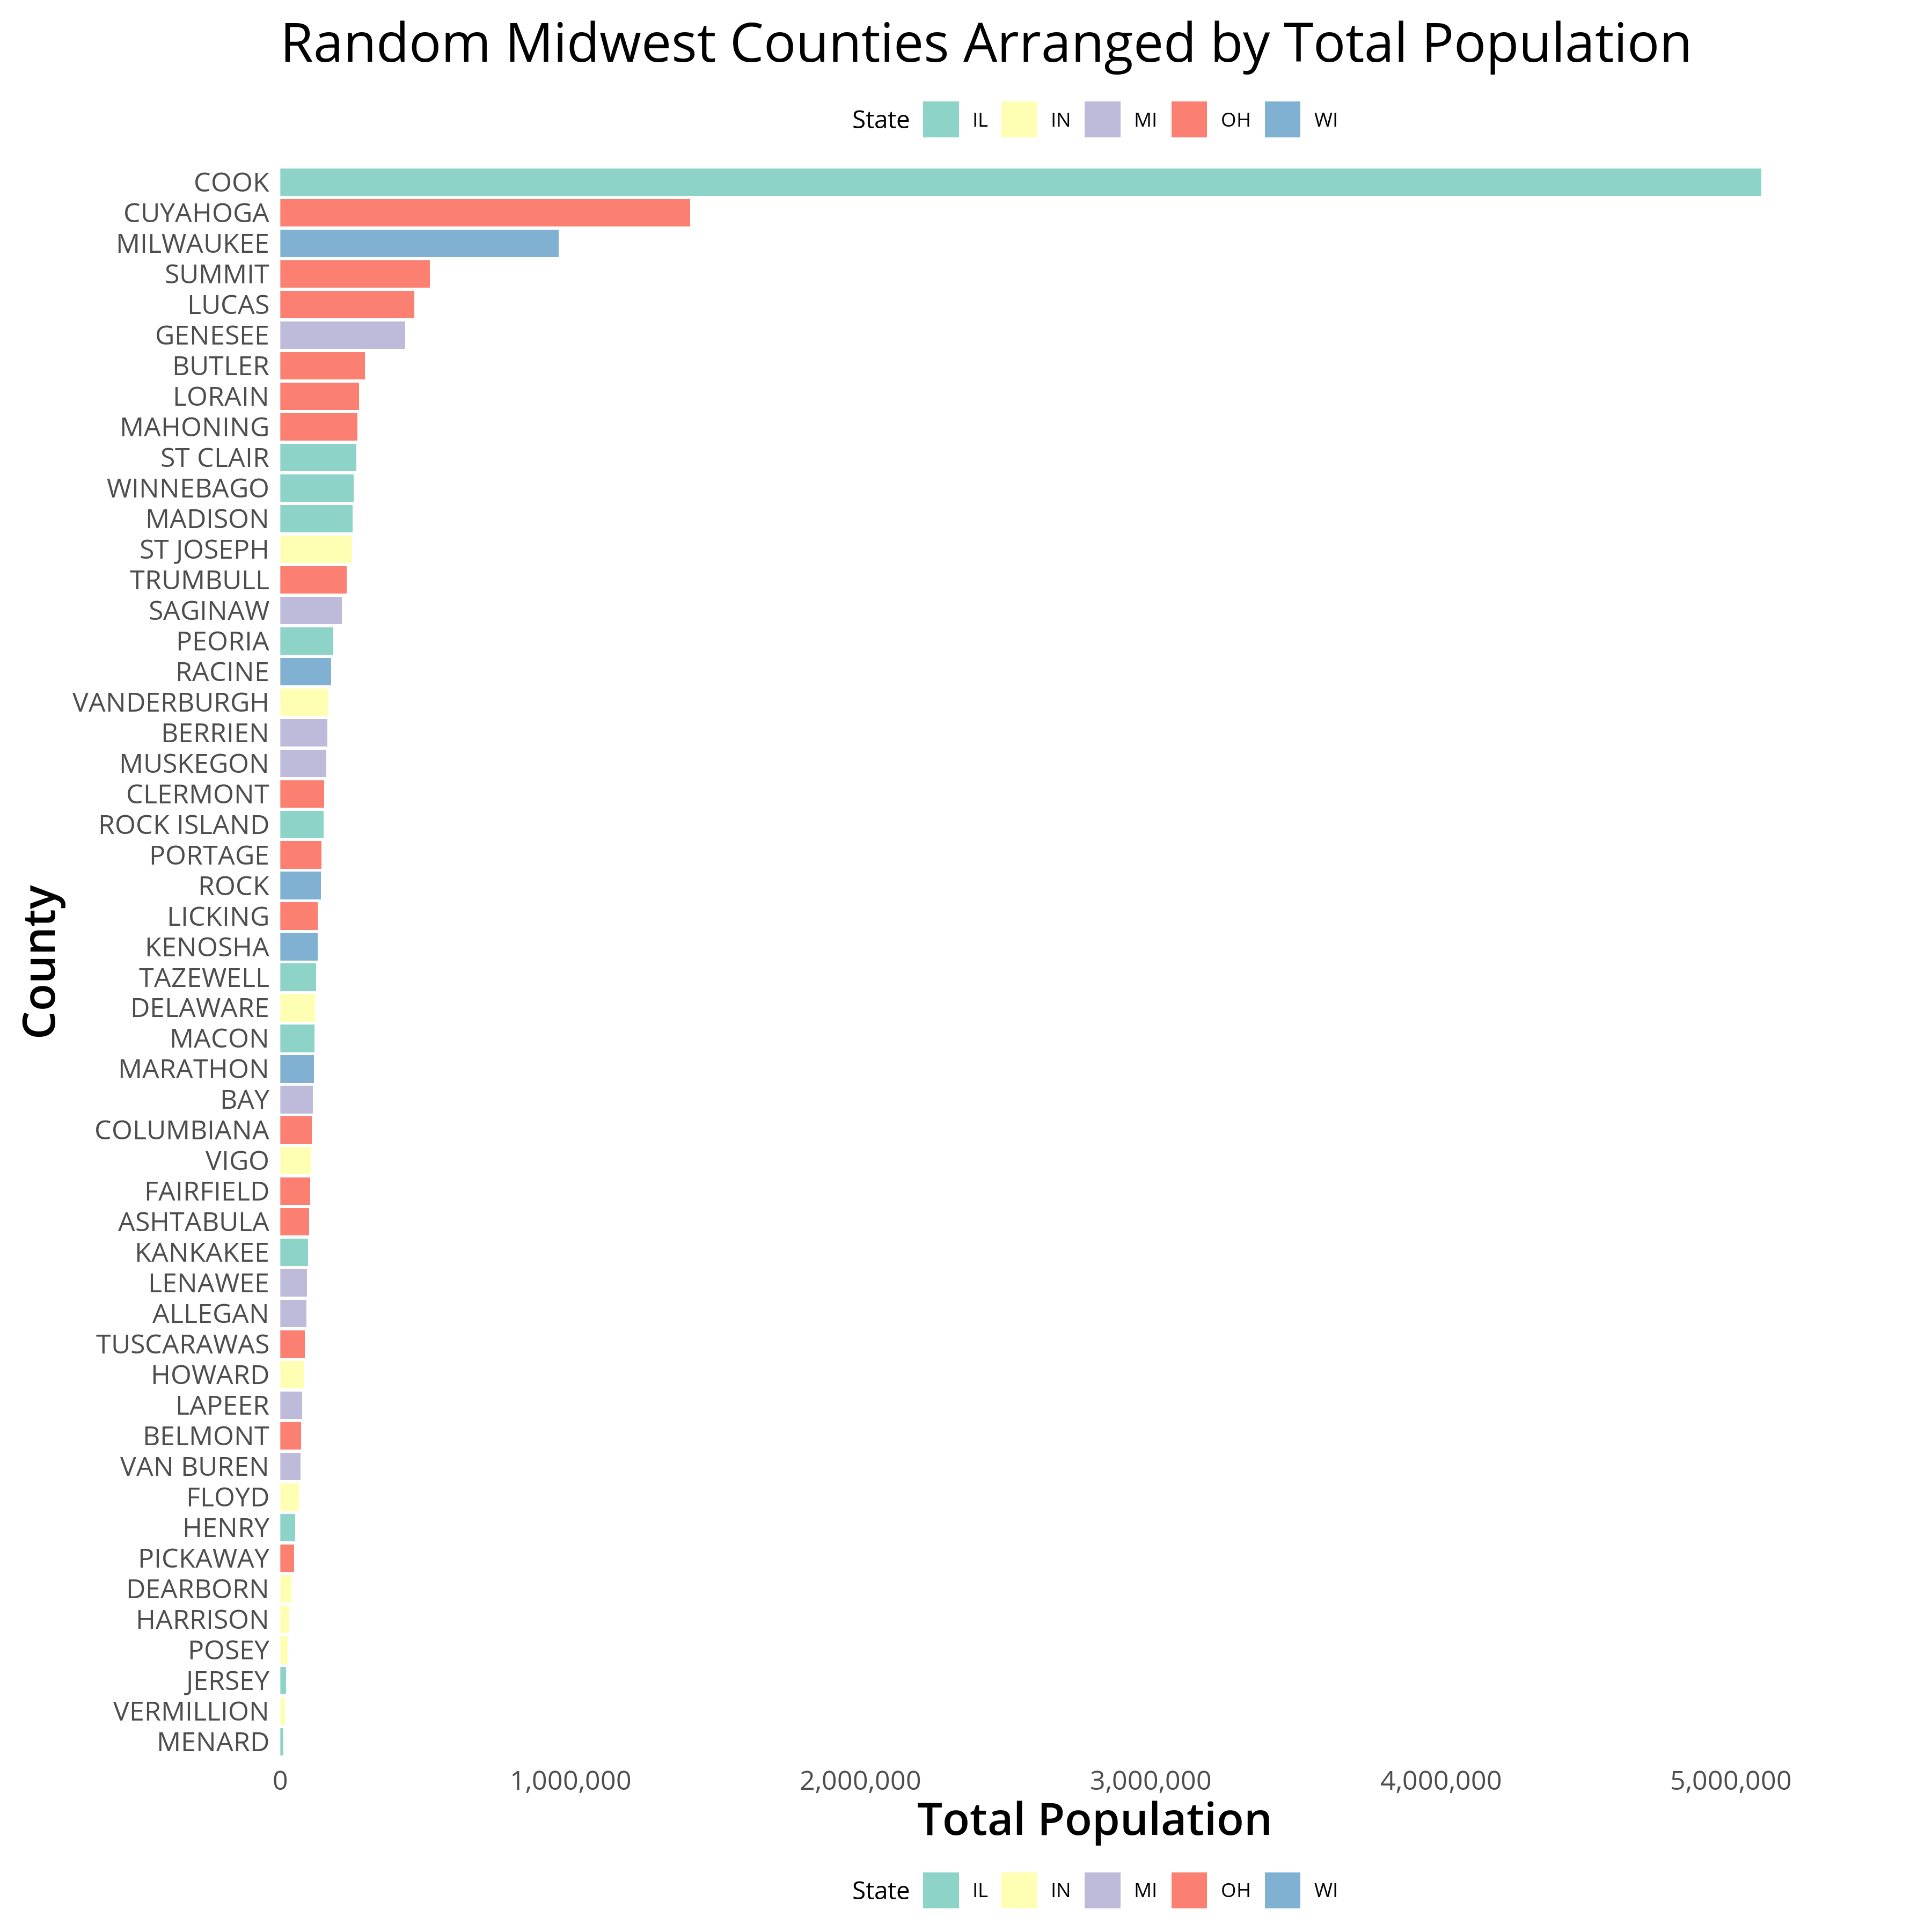 Final Product - Random Midwest Counties Arranged by Total Population